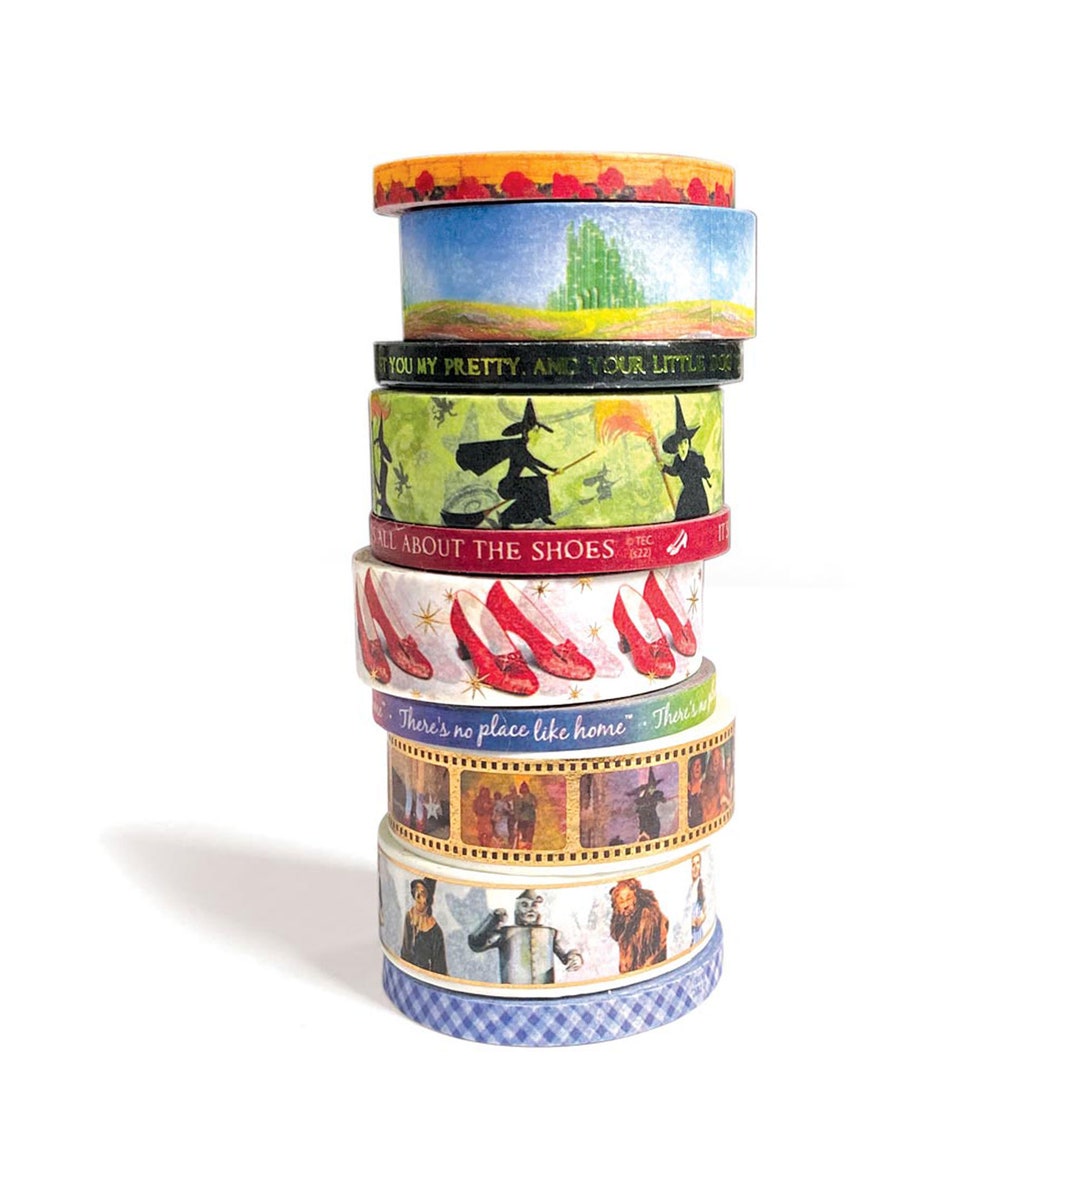 Washi Tape Set - Wizard of Oz Wicked Witch - Paper House